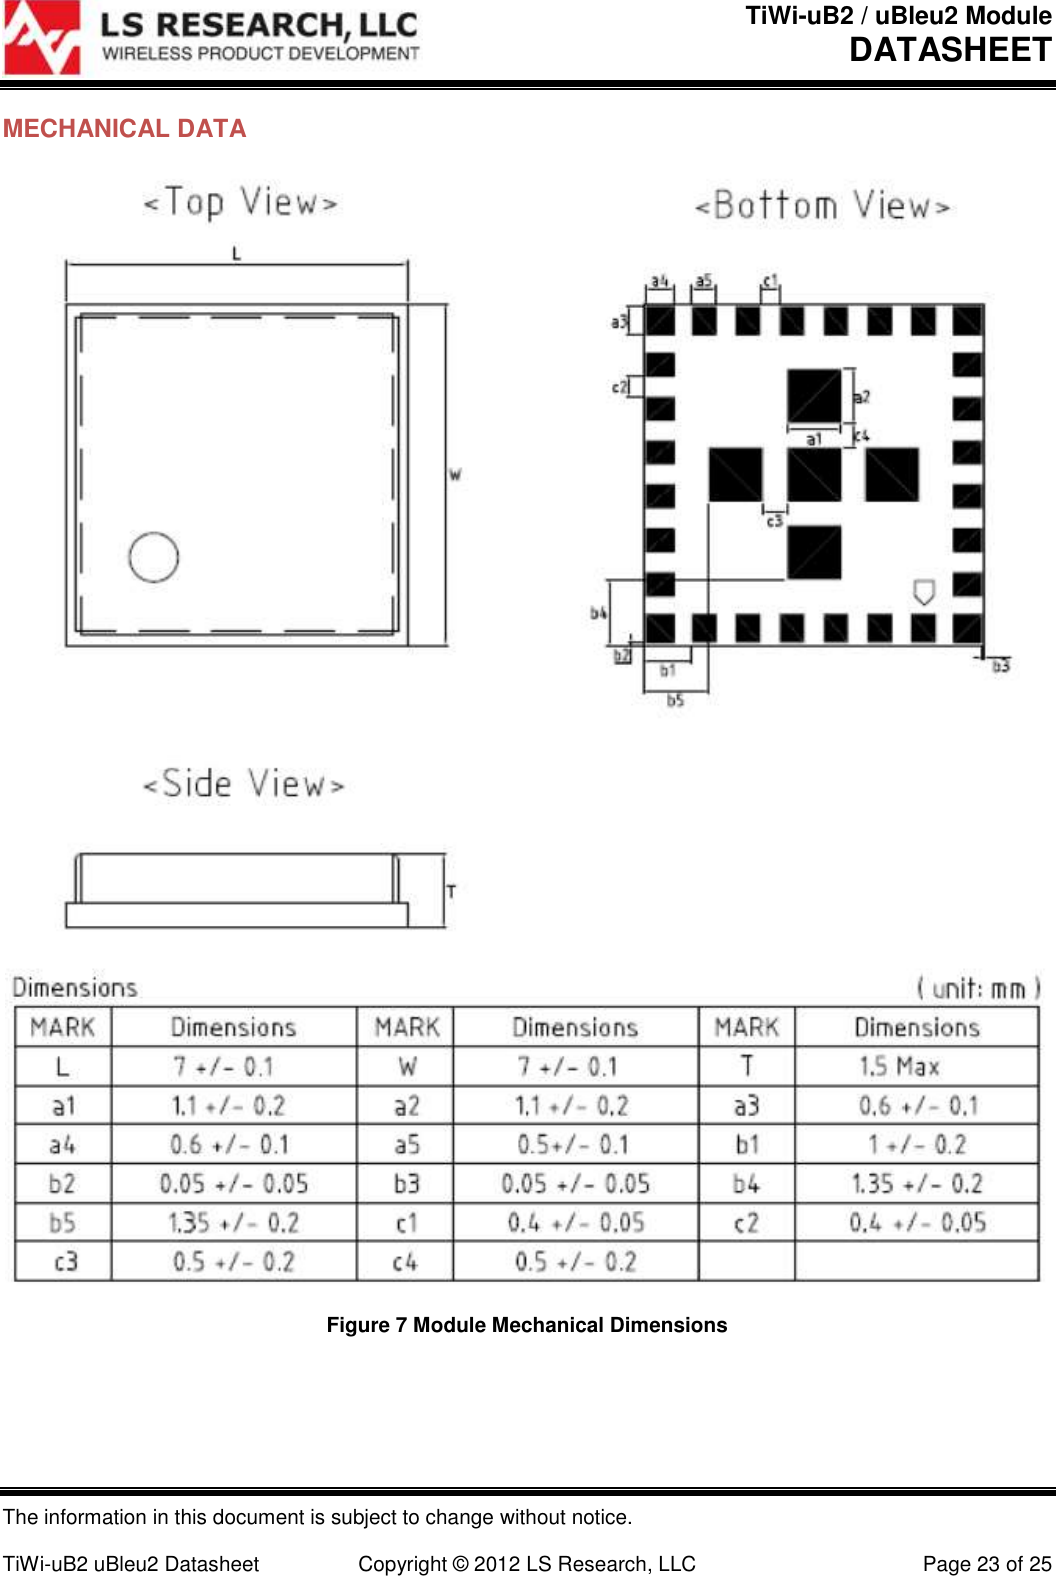 TiWi-uB2 / uBleu2 Module DATASHEET  The information in this document is subject to change without notice.  TiWi-uB2 uBleu2 Datasheet  Copyright © 2012 LS Research, LLC  Page 23 of 25 MECHANICAL DATA  Figure 7 Module Mechanical Dimensions 